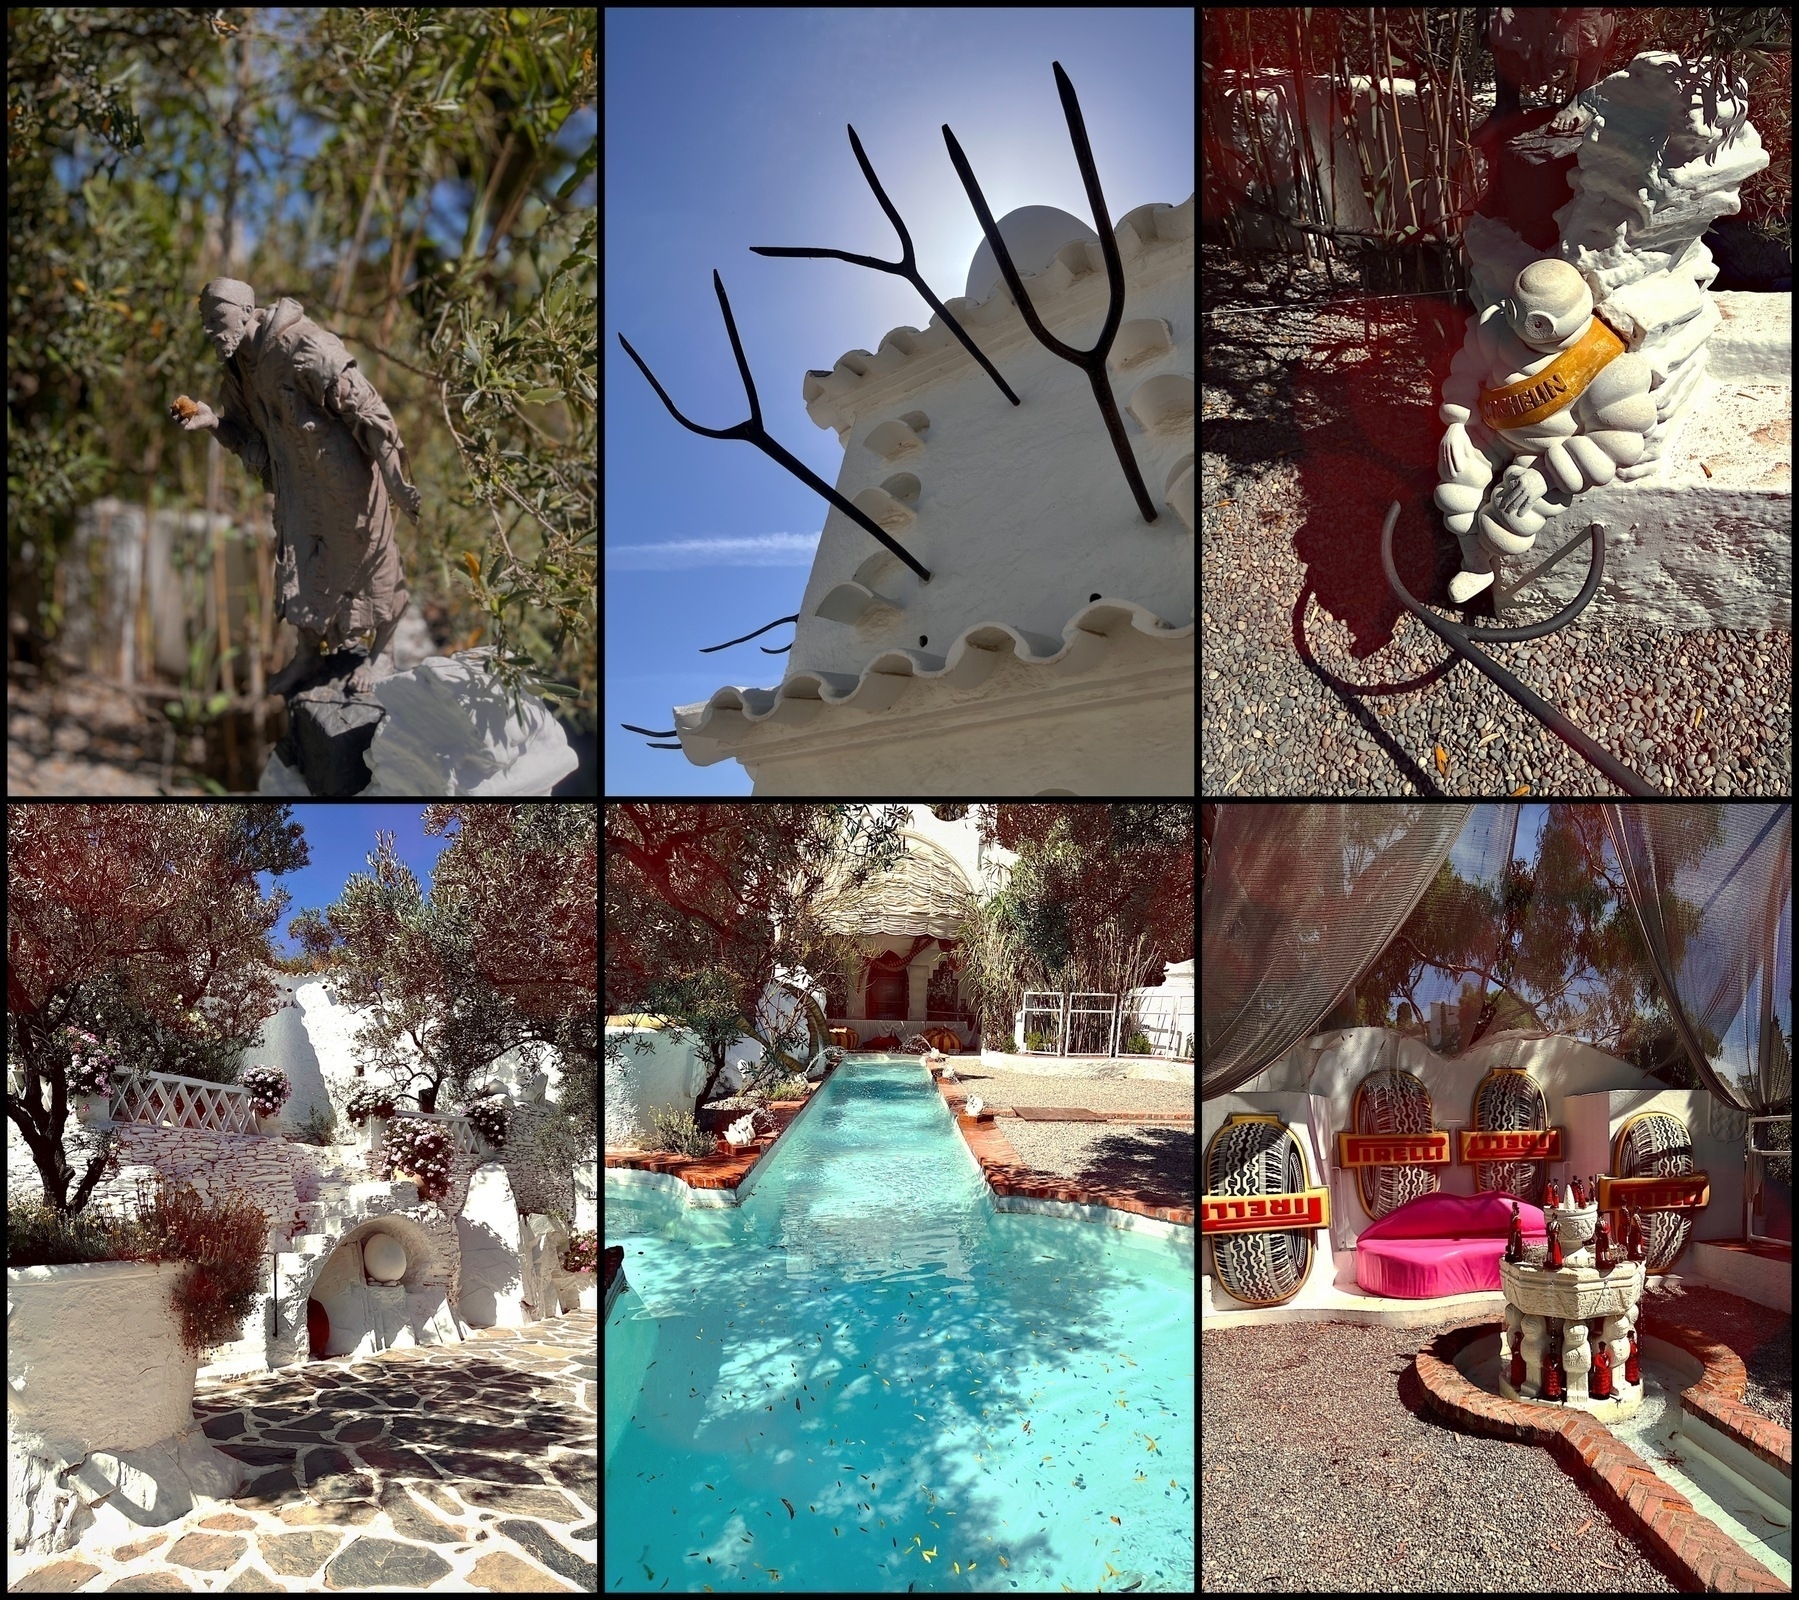 A collage of six outside shots of the outdoor space of Salvador Dali’s house, including a statute of a monk, a swimming pool, a Michelin Man, a pink lips couch, a white building with pitch forks coming out of it, a paved area with trees and steps up to another area.